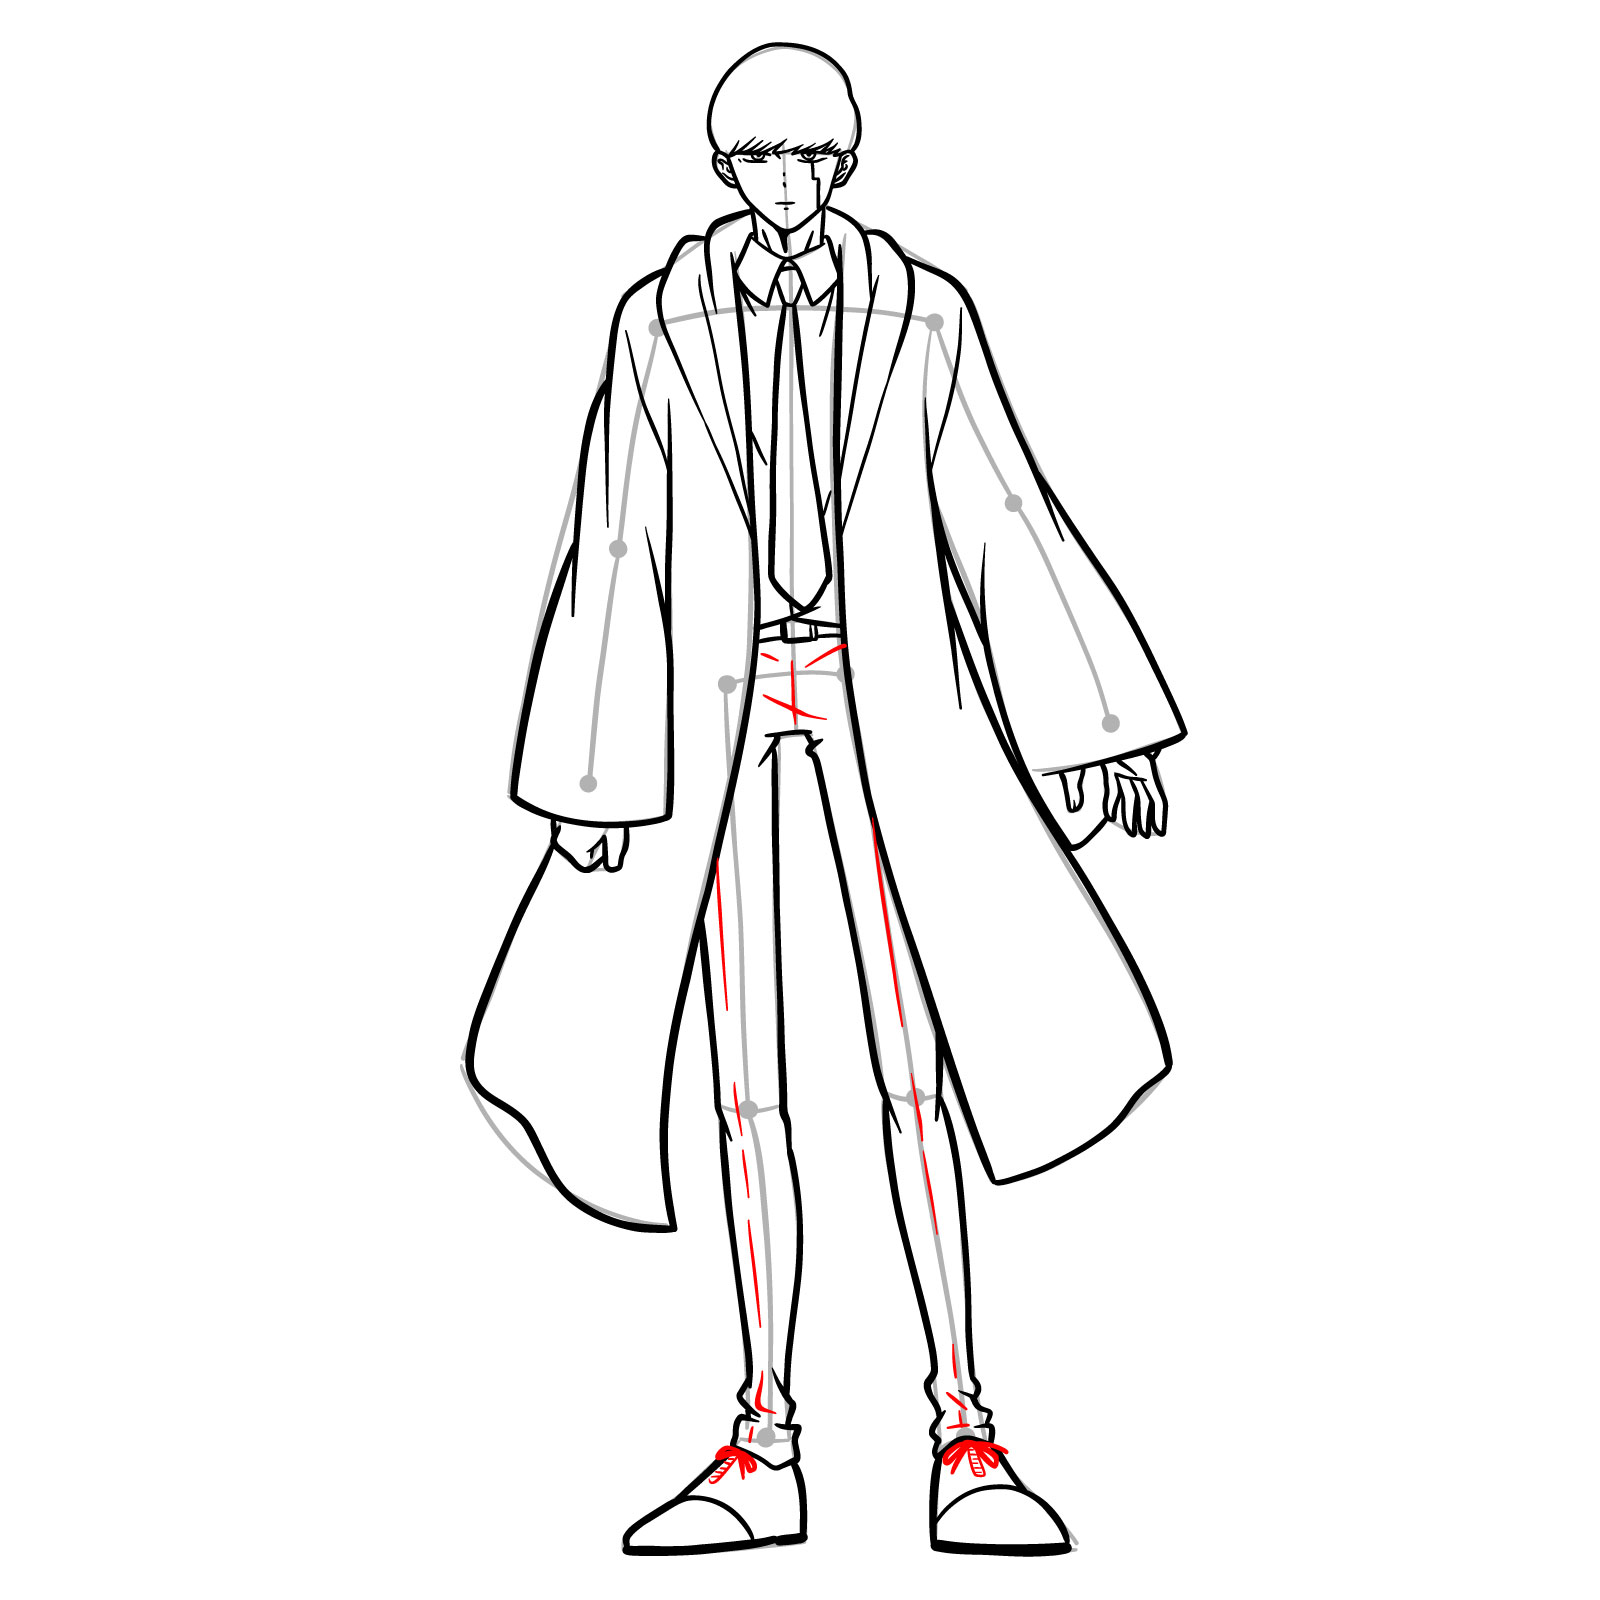 Detailing shoelaces and pant texture in Mash's character drawing - step 18